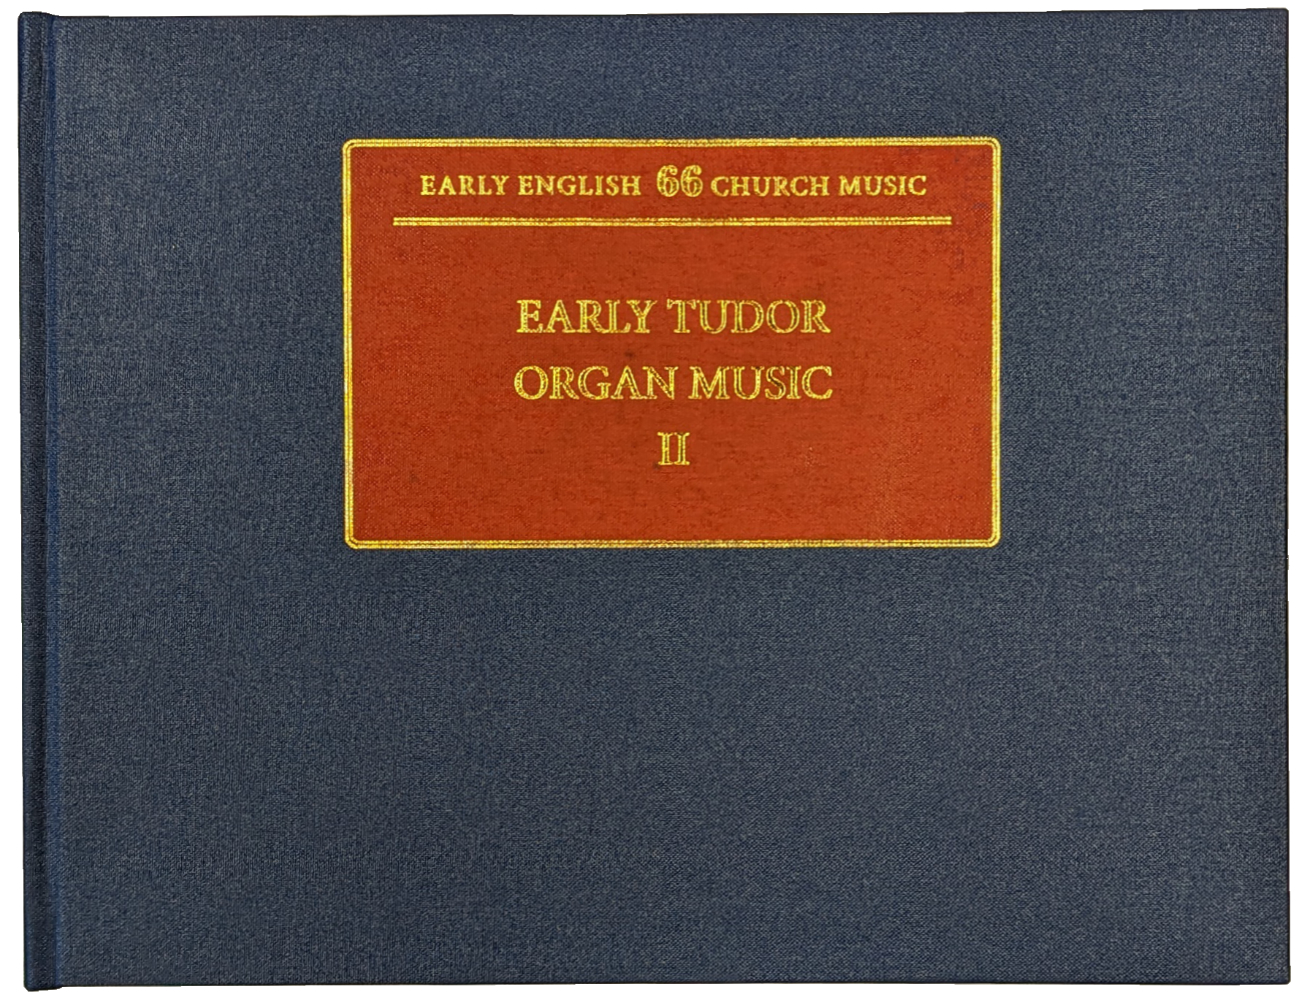 Early Tudor Organ Music Vol 2 published by Stainer and Bell